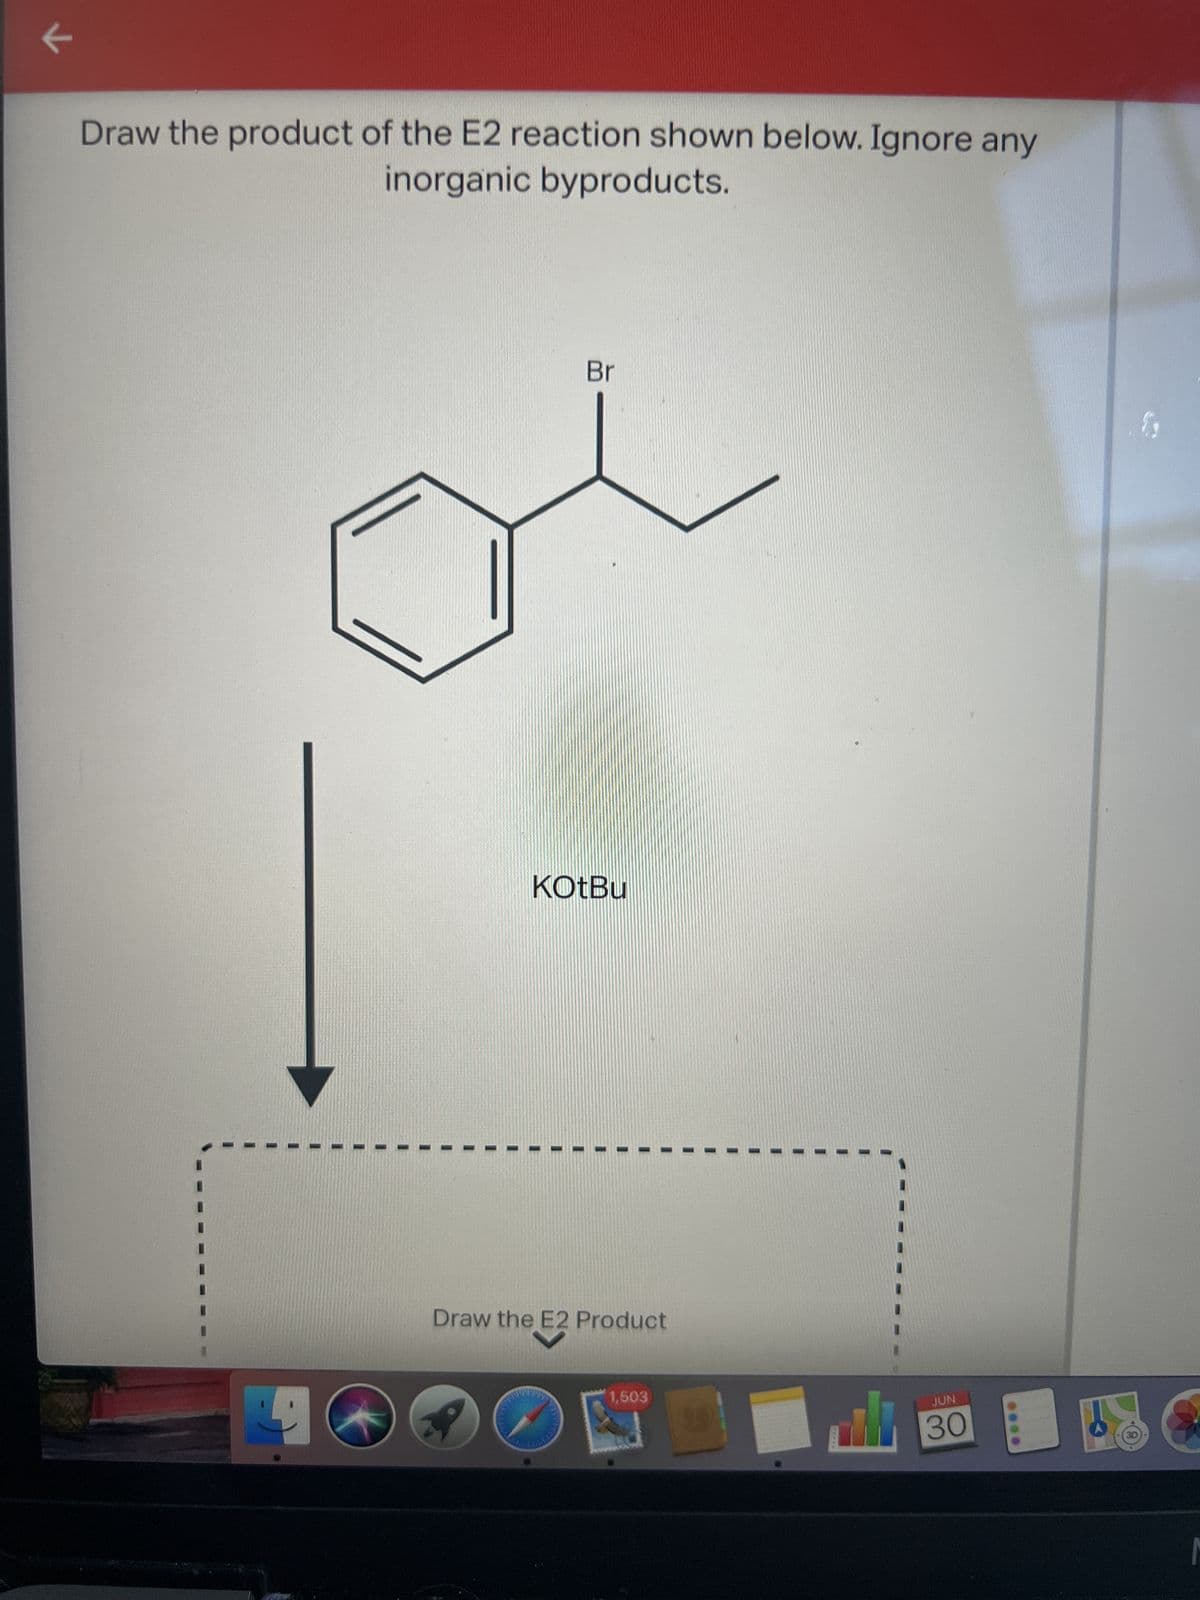 ←
Draw the product of the E2 reaction shown below. Ignore any
inorganic byproducts.
4
Br
KOtBu
ne E2
Draw the E2 Product
1,503
S
il
JUN
30
M